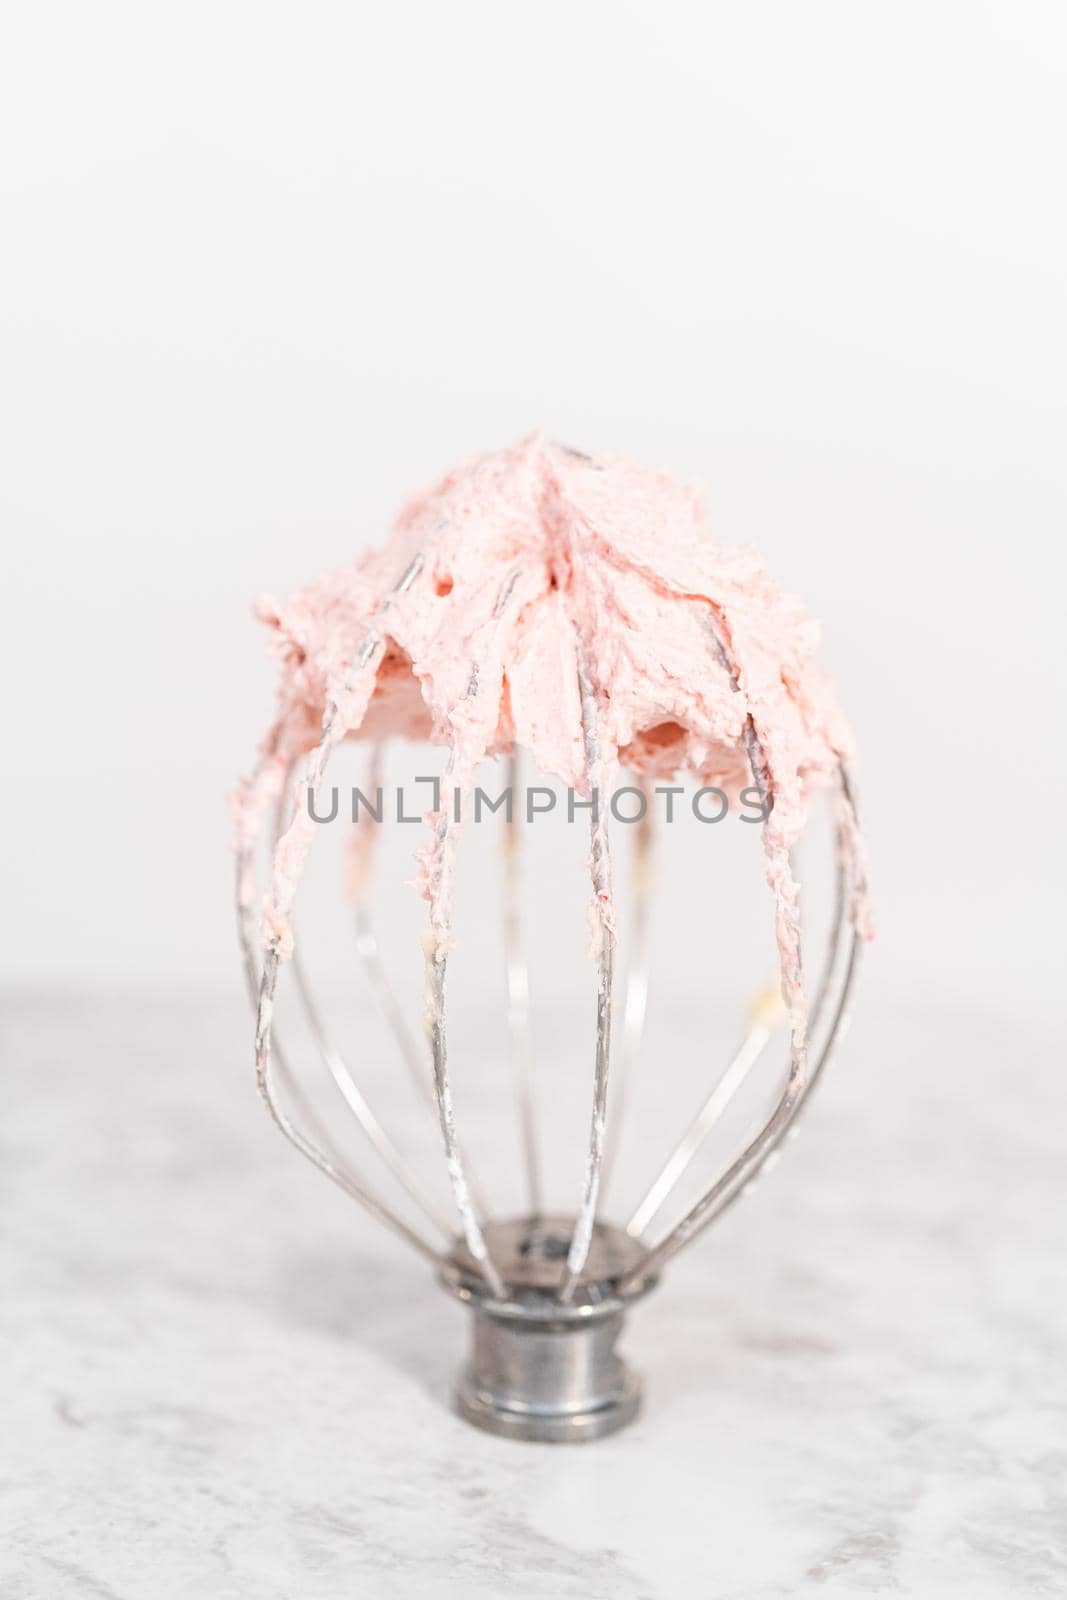 Whisk from the stang-along kitchen mixer filled with strawberry buttercream frosting.